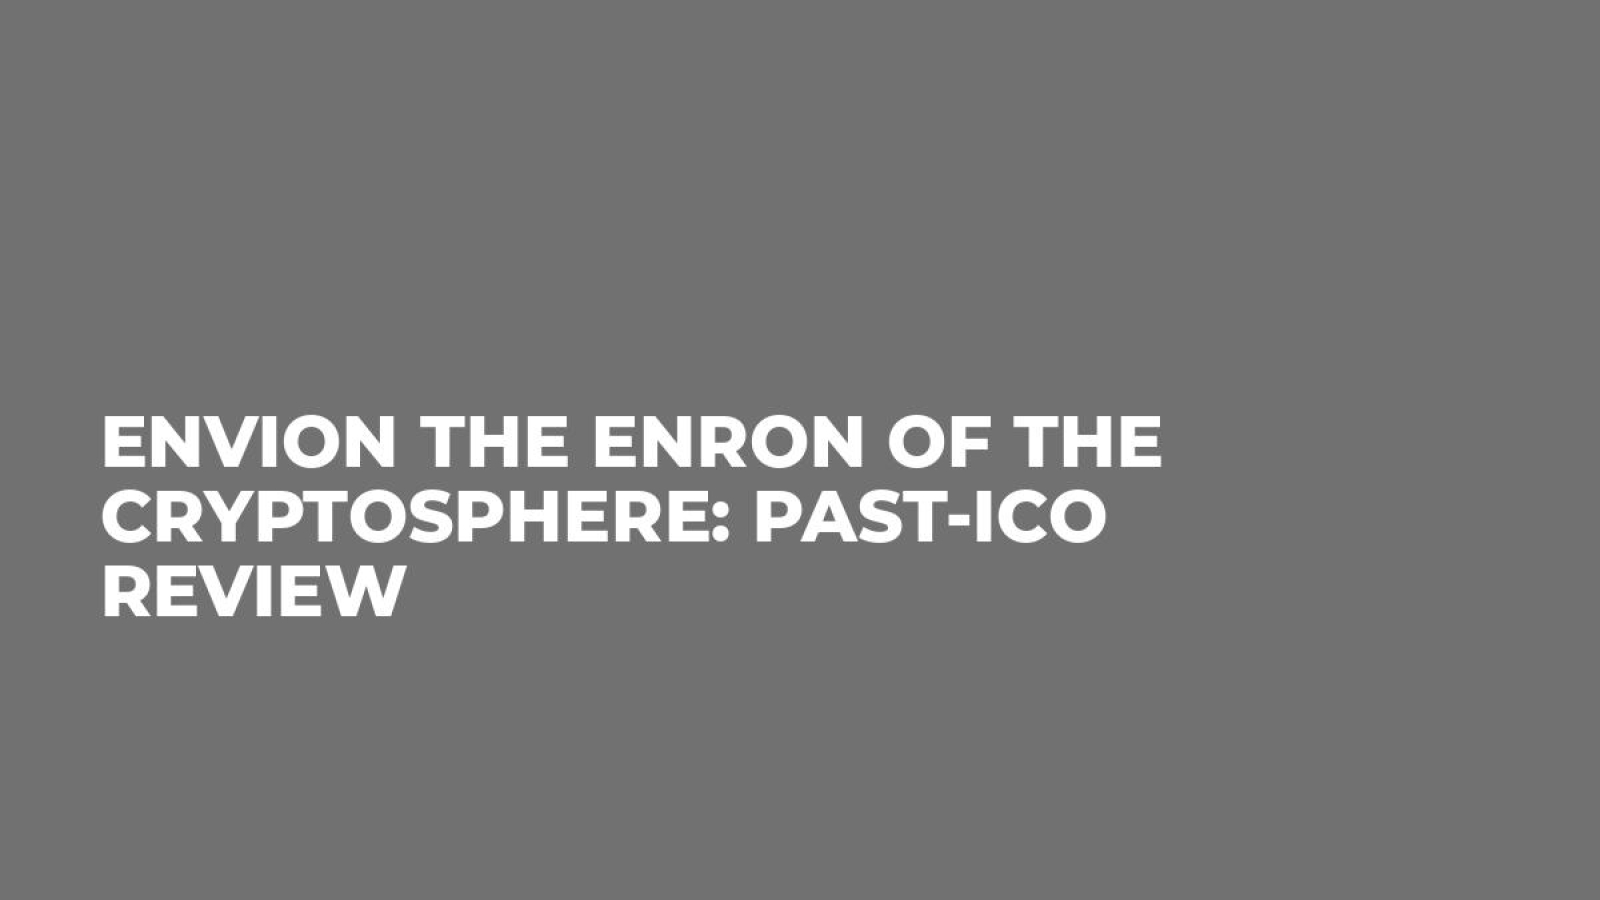 Envion the Enron of the Cryptosphere: Past-ICO Review